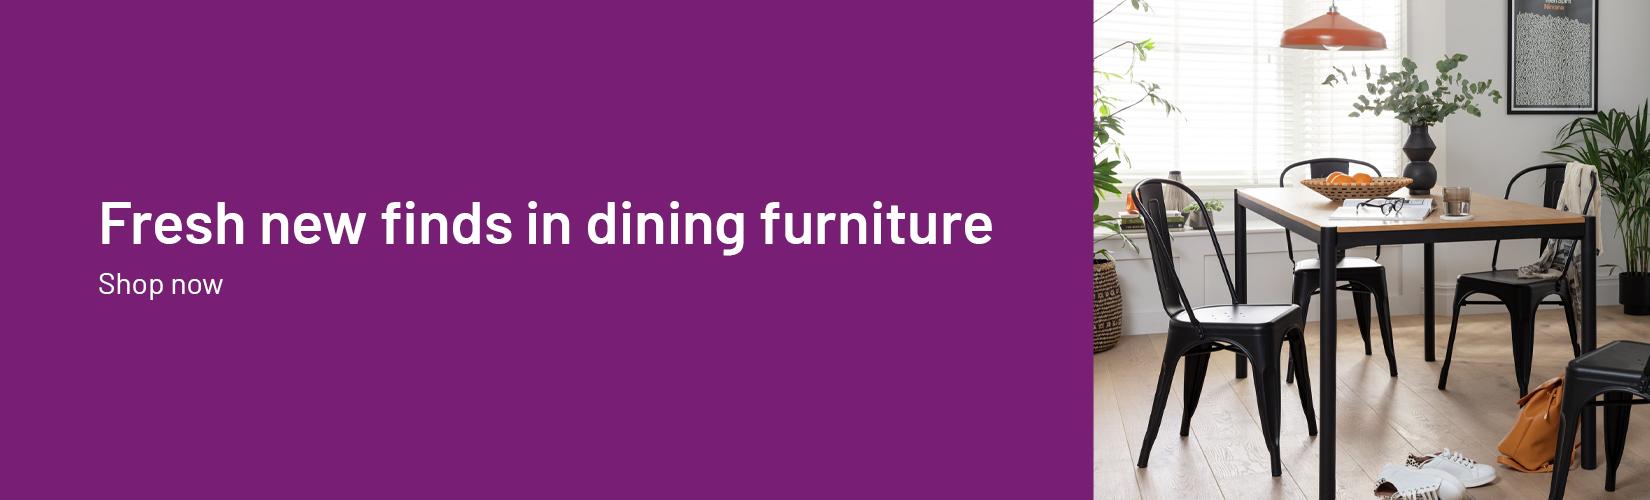 Fresh new finds in dining furniture. Shop now.